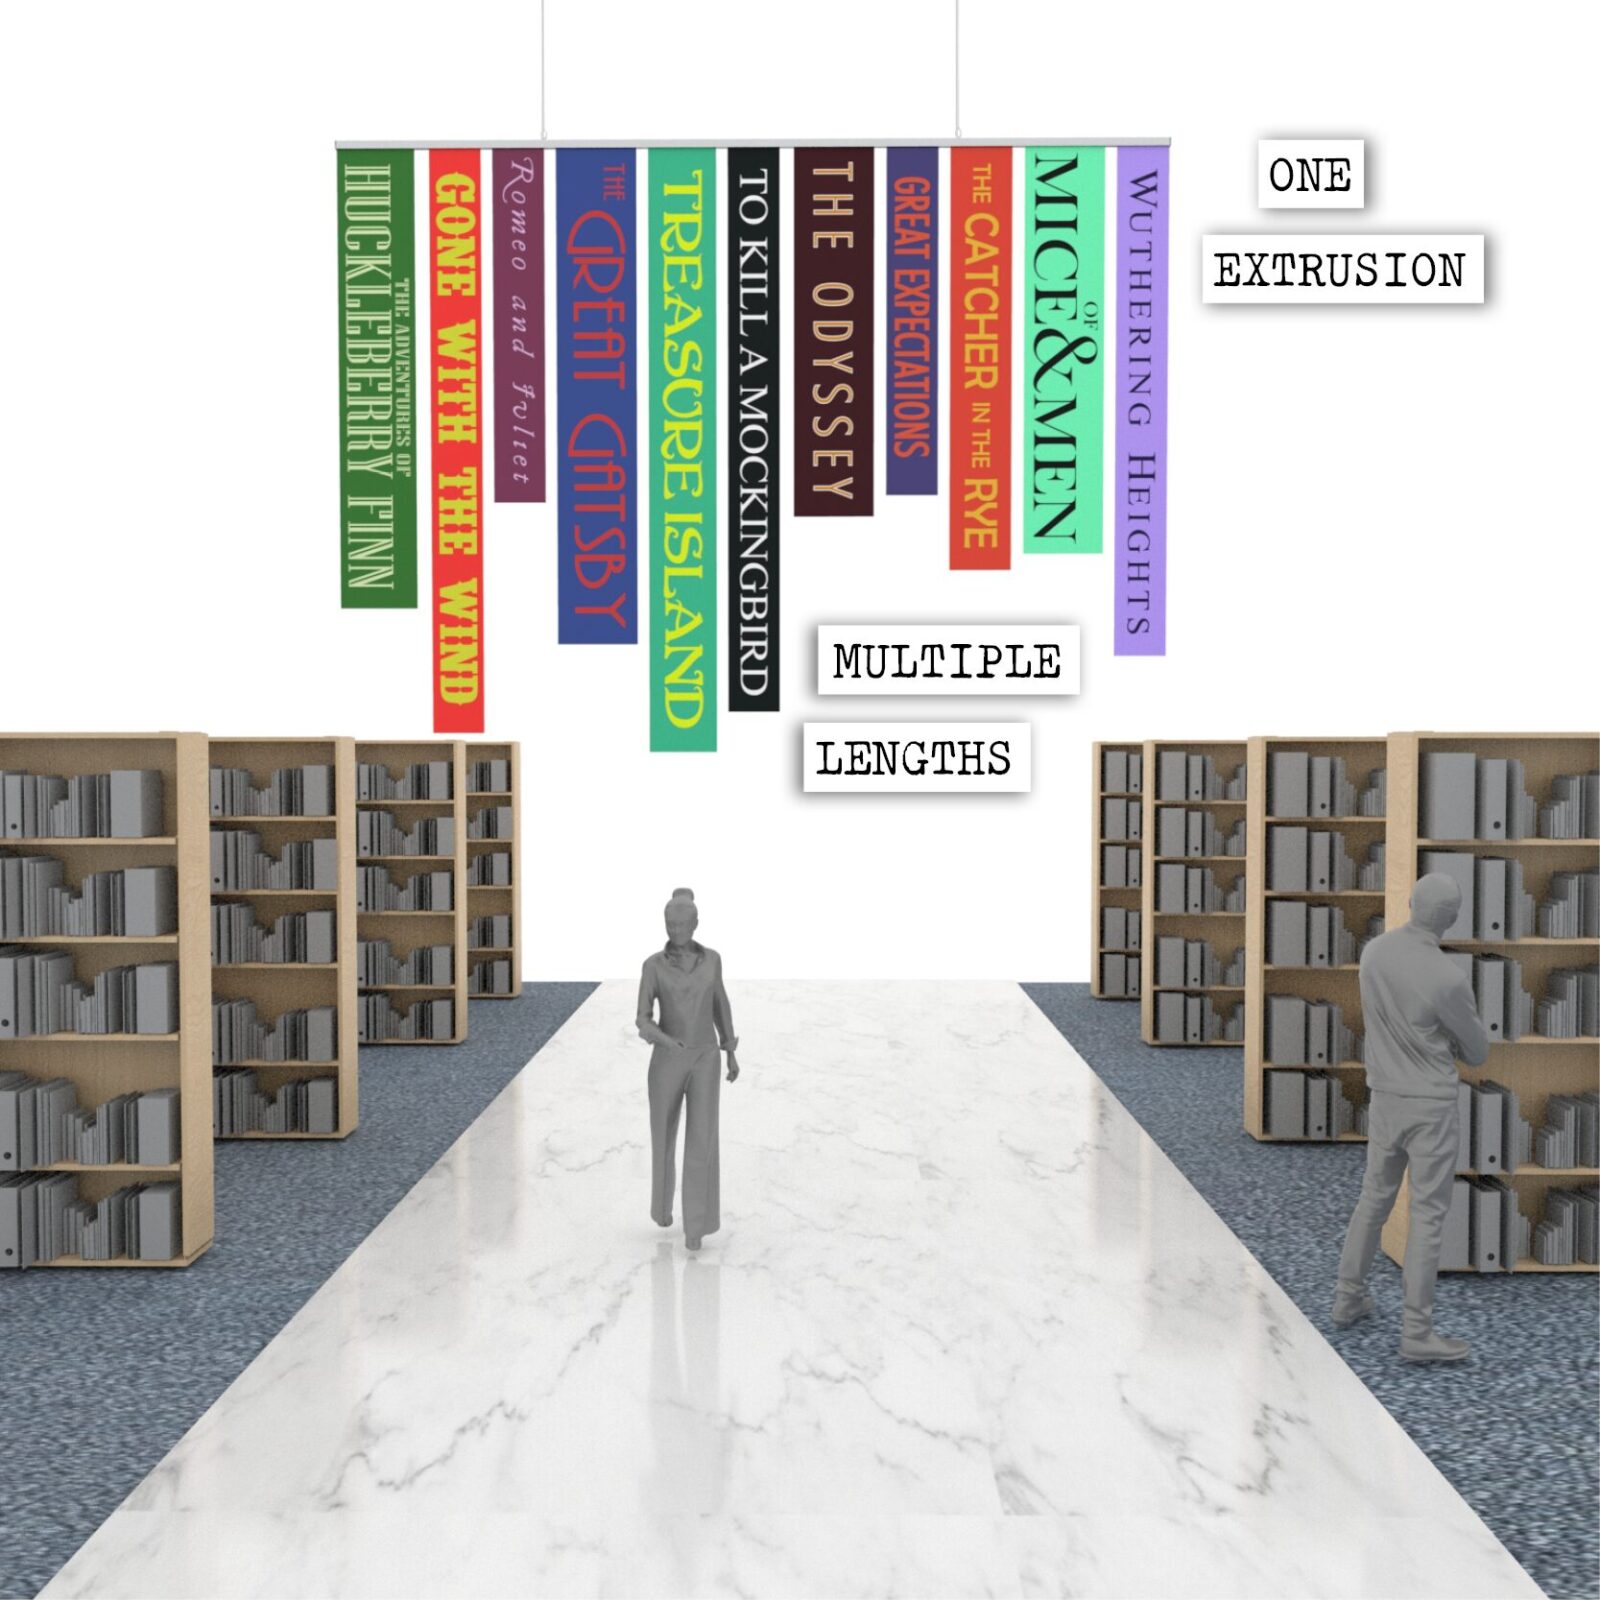 SEG Banner Rail Rendering suspended with multiple signs listing book titles in library